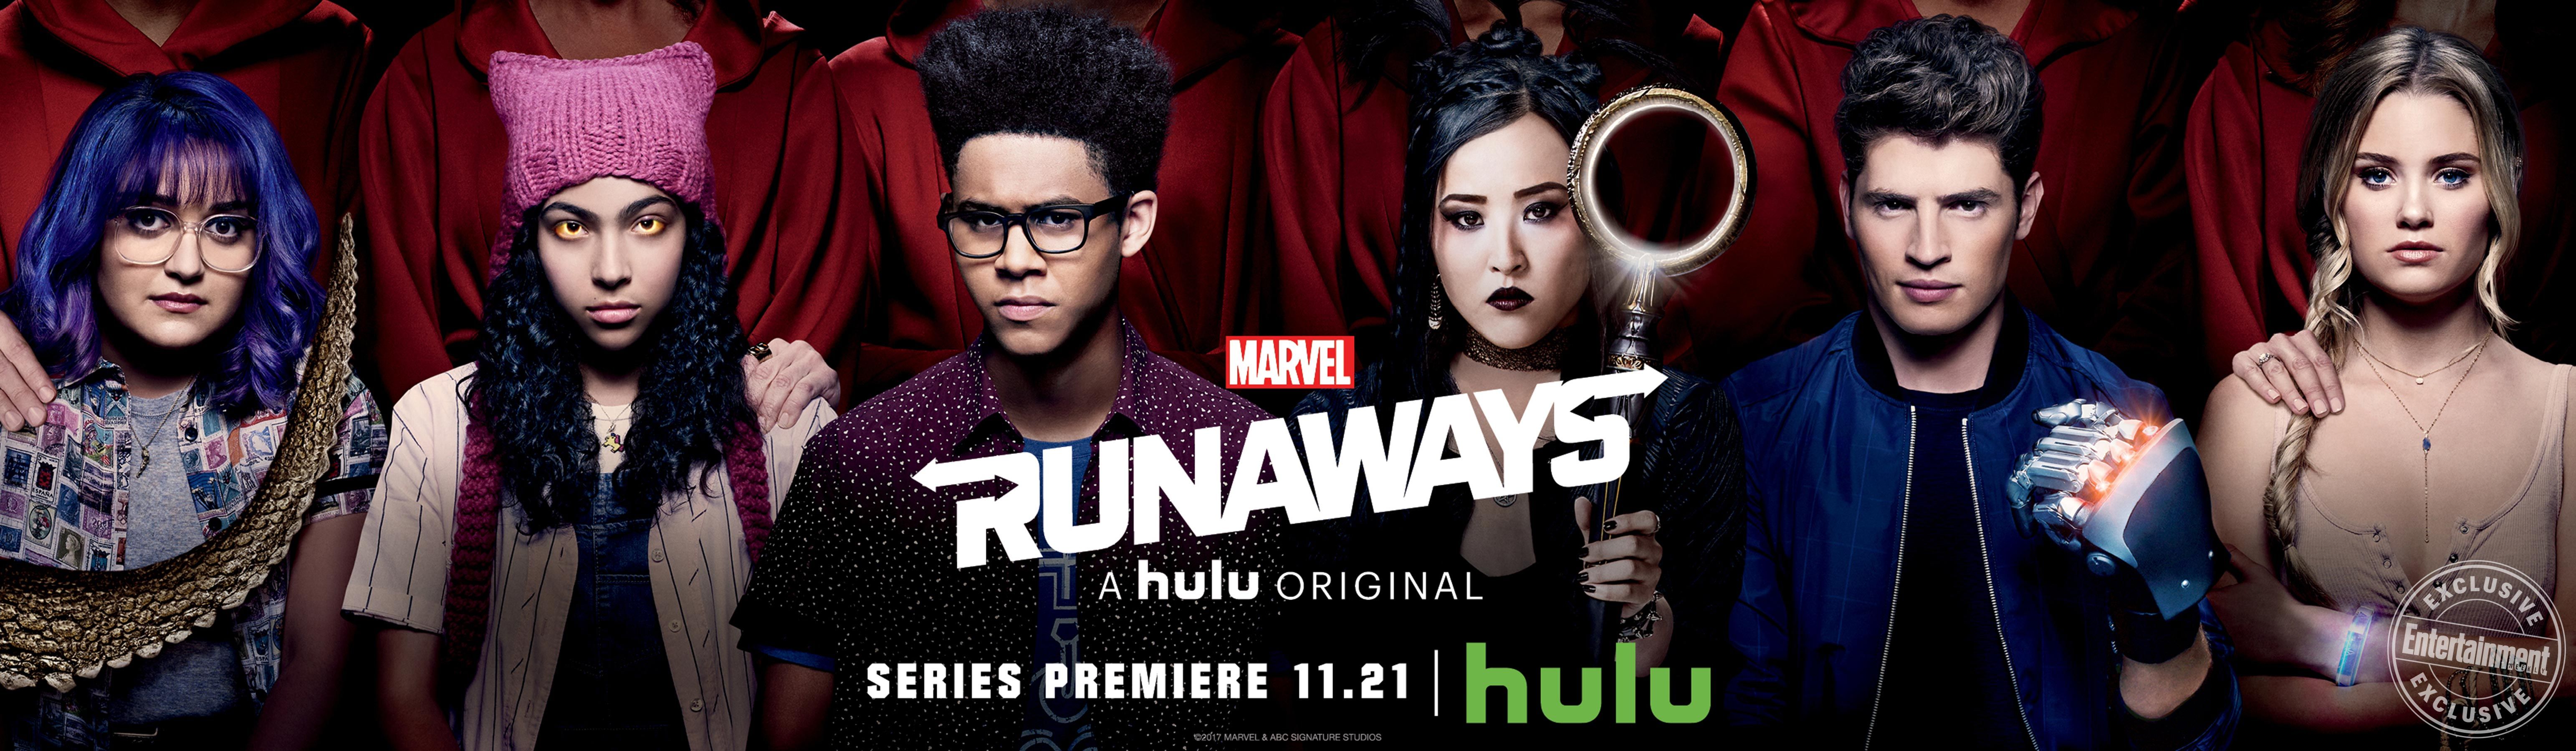 Runaways Banner Highlights the Team’s Different Superpowers